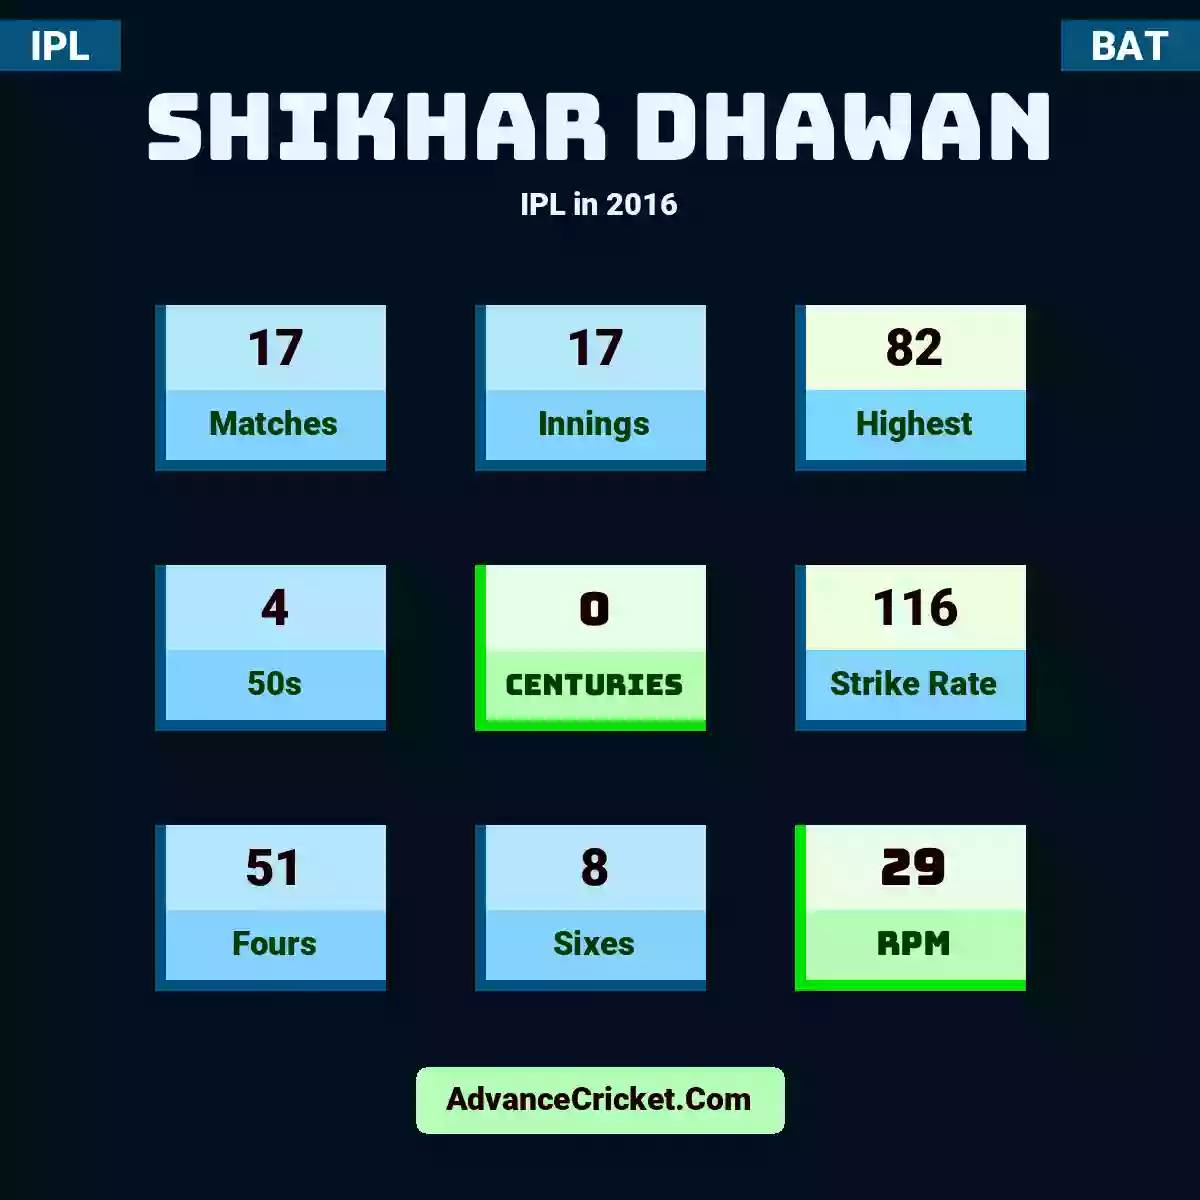 Shikhar Dhawan IPL  in 2016, Shikhar Dhawan played 17 matches, scored 82 runs as highest, 4 half-centuries, and 0 centuries, with a strike rate of 116. S.Dhawan hit 51 fours and 8 sixes, with an RPM of 29.